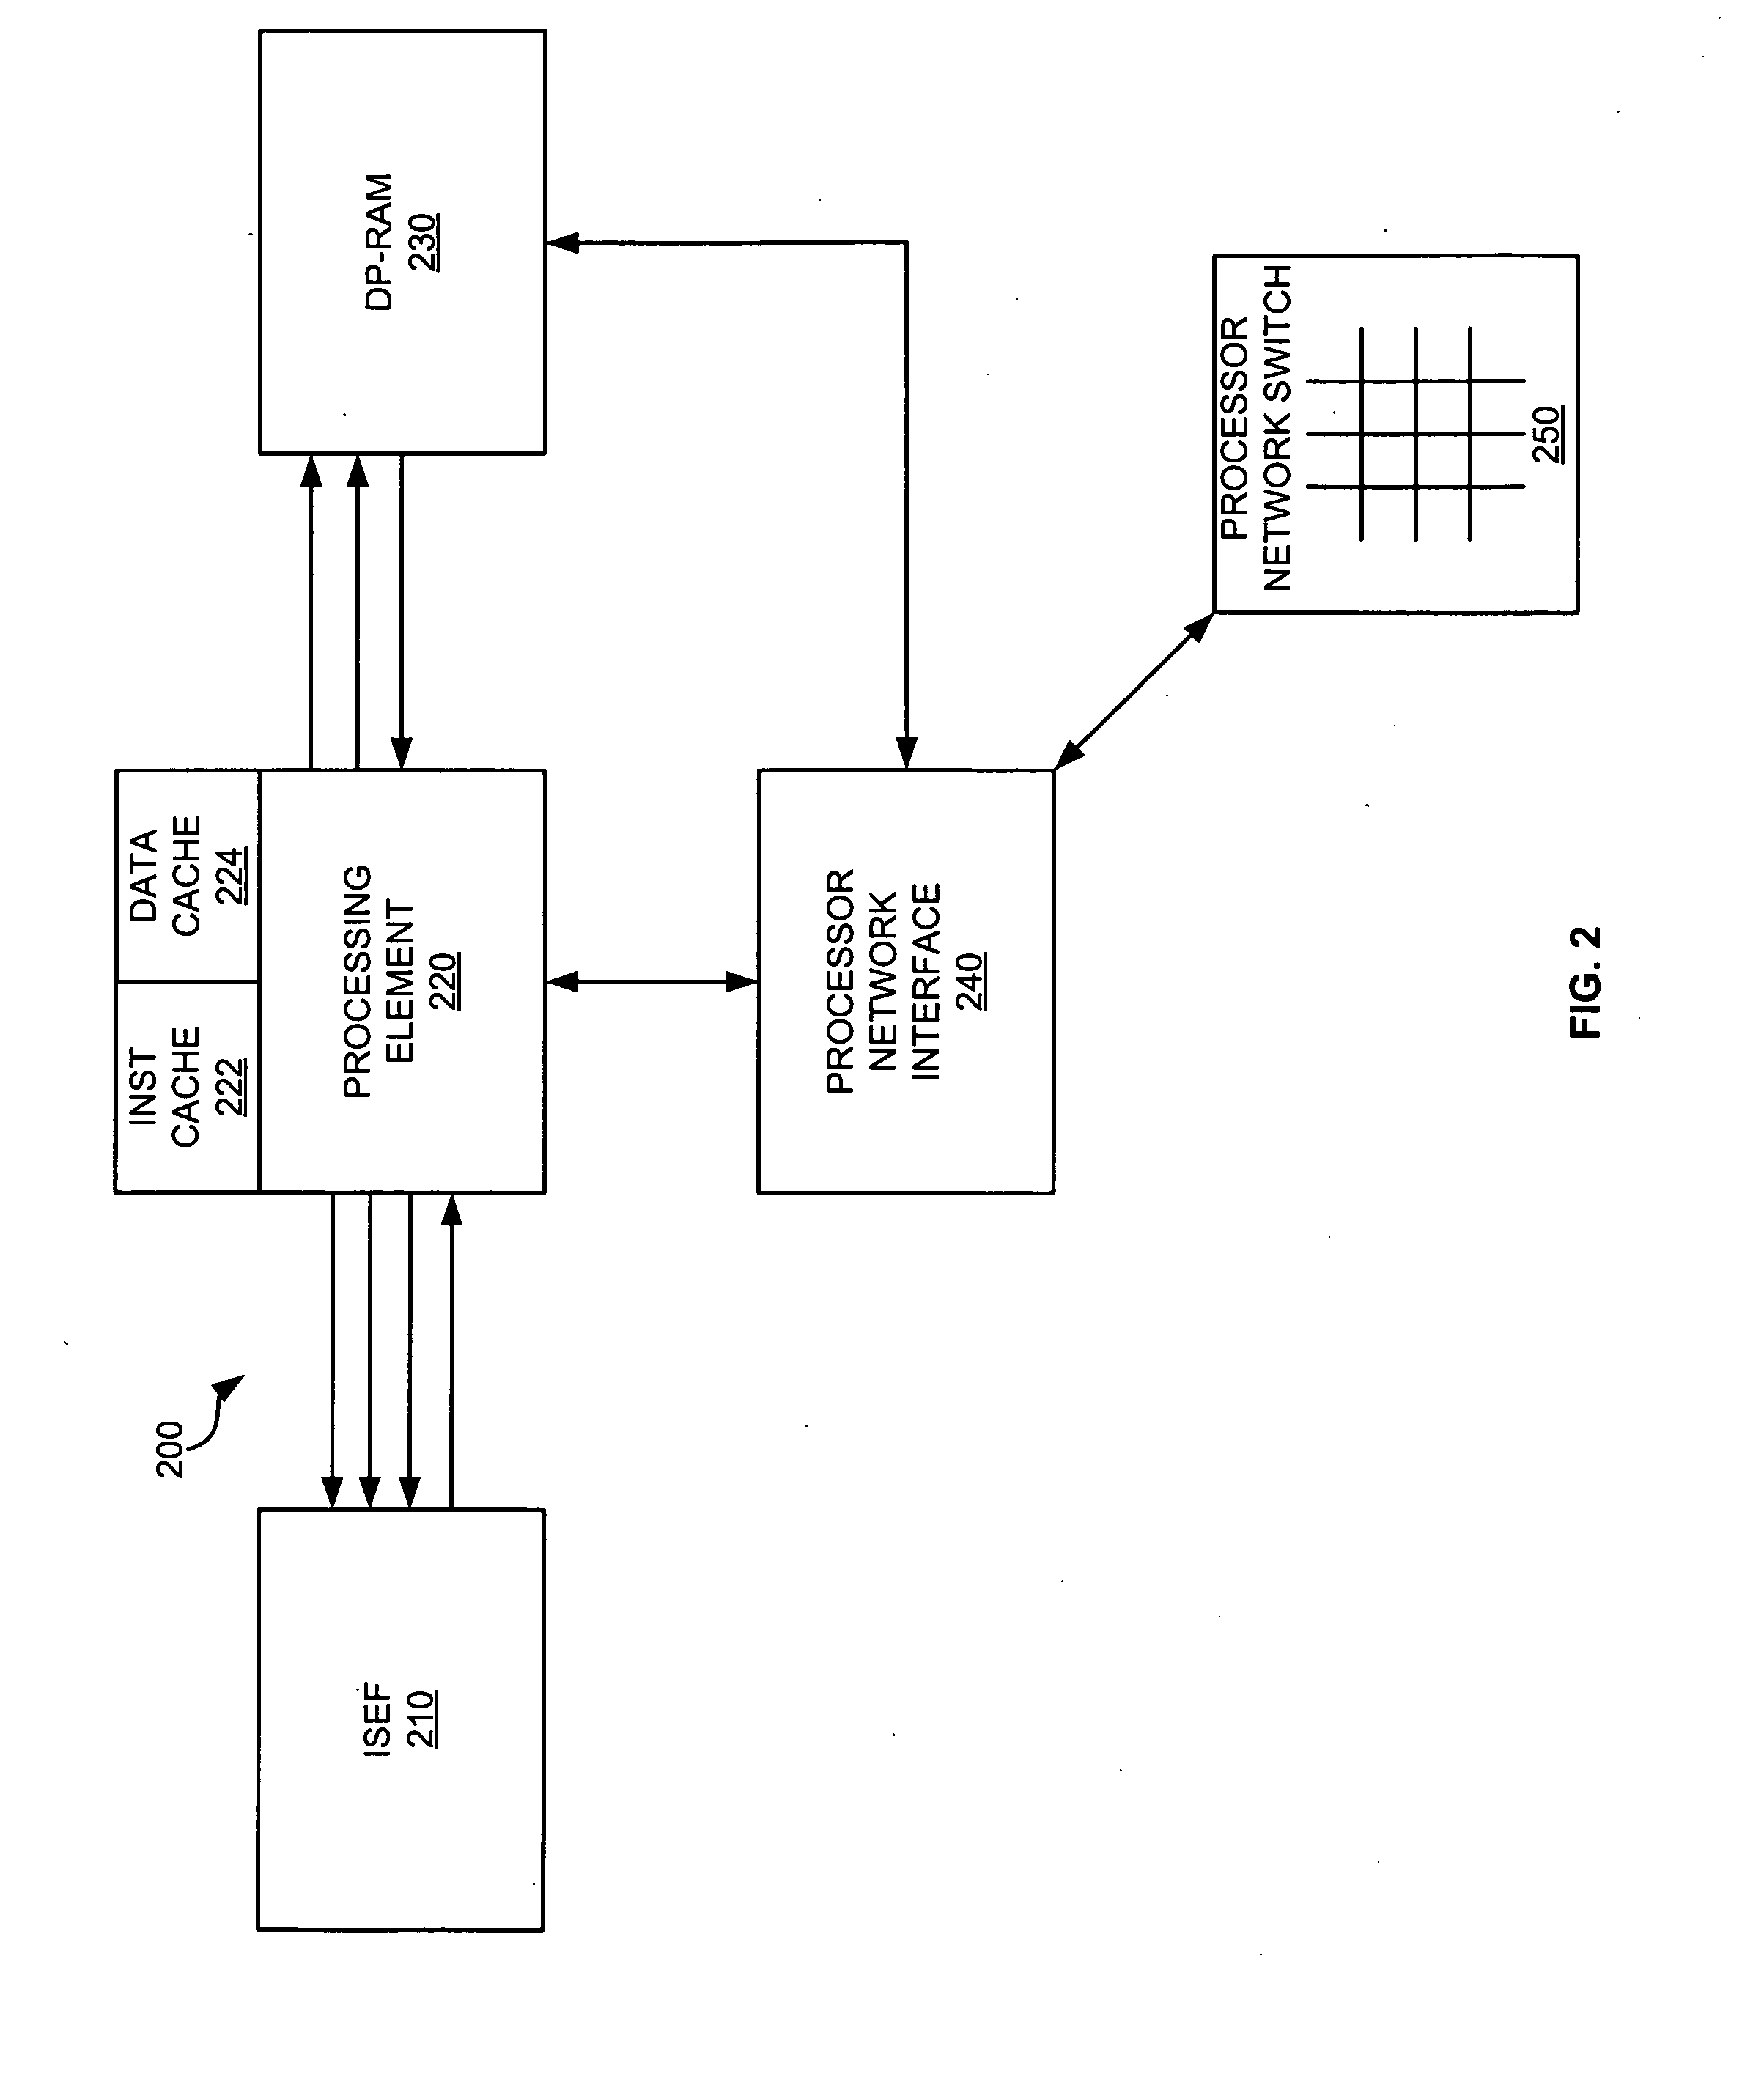 Systems and methods for selecting input/output configuration in an integrated circuit